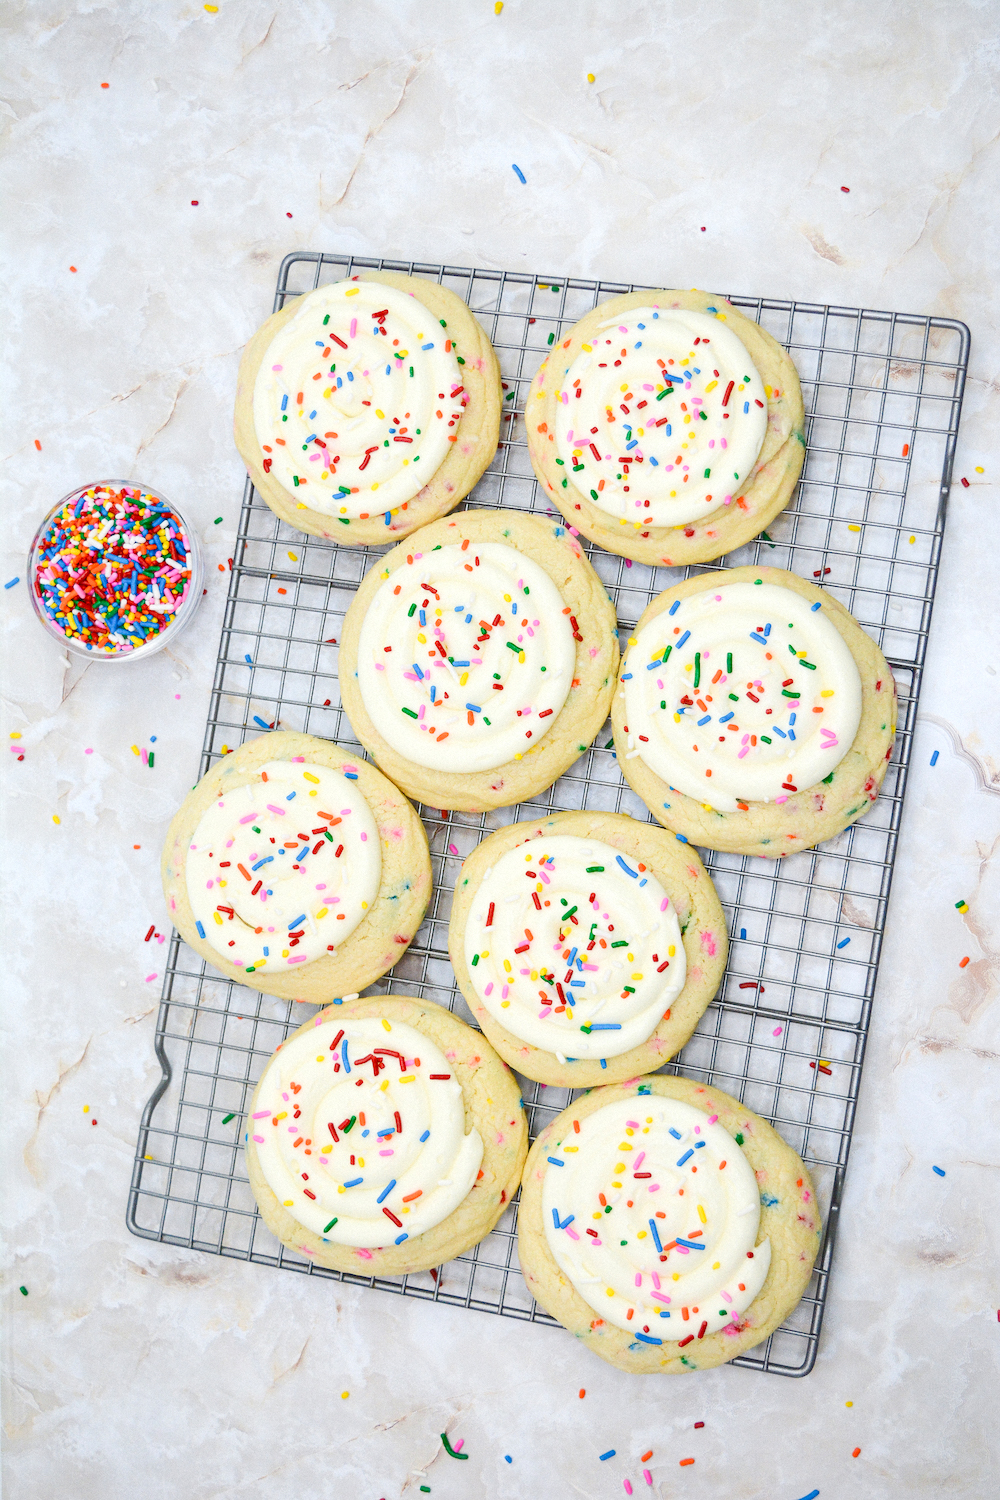 These Birthday Cake Cookies are soft and chewy cookie with the flavors of vanilla cake, topped with colorful sprinkles!